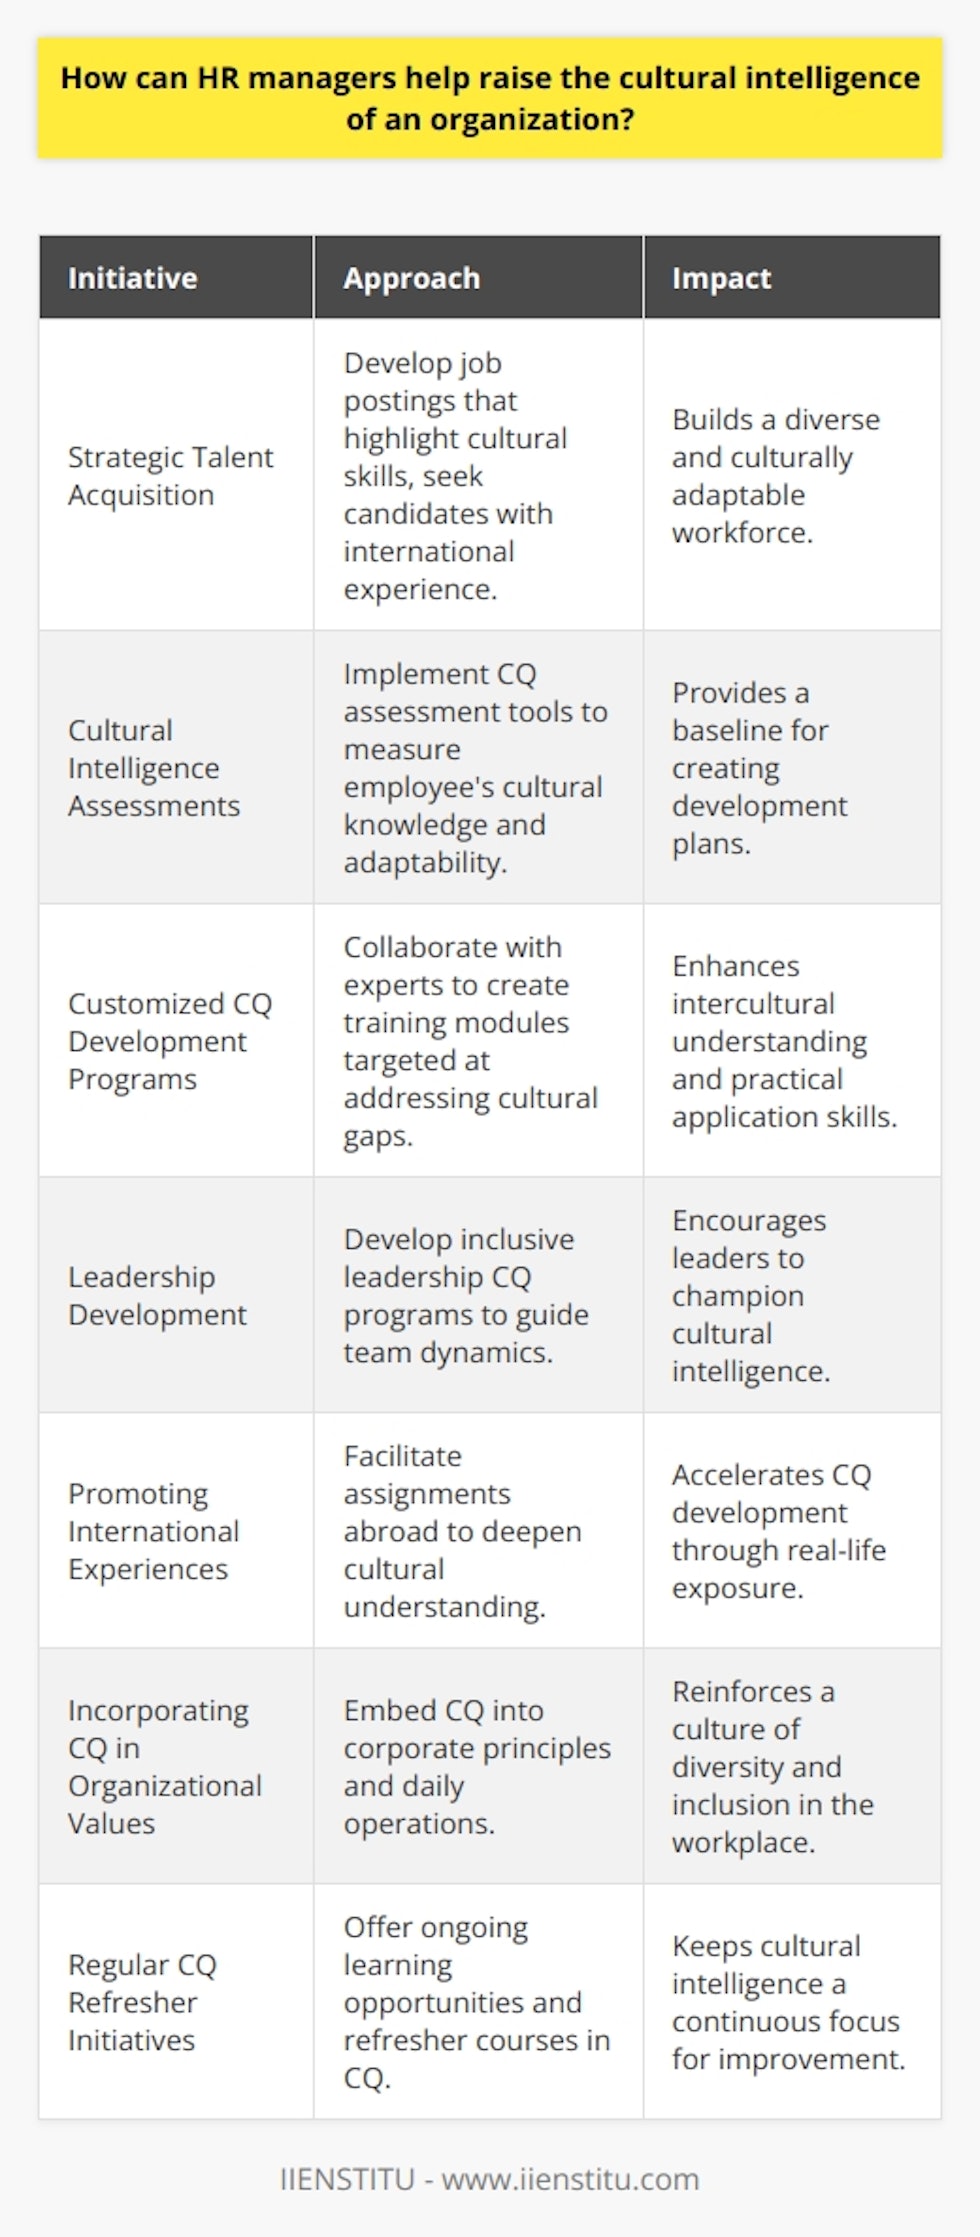 Cultural intelligence, or CQ, is essential in the contemporary global business landscape where diverse workforces and international markets are the norm. Human Resources (HR) managers are key players in cultivating an organization’s CQ, which can significantly impact its success and sustainability.**Strategic Talent Acquisition**HR managers can enhance an organization’s CQ right from the hiring process. By strategically focusing on talent acquisition, they can ensure that new hires not only bring diverse cultural perspectives but also have a predisposition to cultural adaptability. This involves developing job postings and interview questions that explicitly value cross-cultural skills and seeking out candidates with international experience or language skills.**Cultural Intelligence Assessments**To gauge and subsequently raise the CQ of existing personnel, HR can utilize cultural intelligence assessments. Such tools help identify the current CQ levels of employees and provide baseline data to inform comprehensive development plans. These assessments should measure components such as cultural knowledge, cross-cultural communication skills, and cultural adaptability.**Customized CQ Development Programs**Customized training programs that are tailored to the specific needs of the organization can be implemented to improve CQ. HR managers can collaborate with expert institutions, such as IIENSTITU, known for their specialized training programs, to create modules that address gaps in intercultural understanding and provide practical tools for employees to navigate cultural differences effectively.**Leadership Development**Leaders set the tone for cultural intelligence within the organization. HR's role in providing development opportunities for leaders, focused on enhancing their CQ, is vital. Such programs encourage leaders to model inclusive behaviors and develop competencies in managing culturally diverse teams.**Promoting International Experiences**Encouraging or facilitating international experiences, through assignments or short-term projects abroad, can provide employees with real-life context to apply and enhance their cultural understanding. Exposure to different cultures can fast-track the development of CQ.**Incorporating CQ in Organizational Values**Cultural intelligence should be woven into the fabric of the organization’s values. HR managers can work towards embedding CQ into corporate principles, which can then be reflected in every operational aspect, from customer service to internal team collaboration.**Regular CQ Refresher Initiatives**To maintain and continually improve the CQ within an organization, HR managers can initiate regular refresher courses or continuous learning opportunities, keeping the concept at the forefront of organizational development endeavors.Through a commitment to these initiatives, HR managers have the power to cultivate a workforce that excels in cultural intelligence. This not only improves the internal dynamics of an organization but also equips it to perform effectively in the global economy. By fostering an understanding and appreciation of cultural differences, HR managers can turn cultural diversity into a competitive advantage.